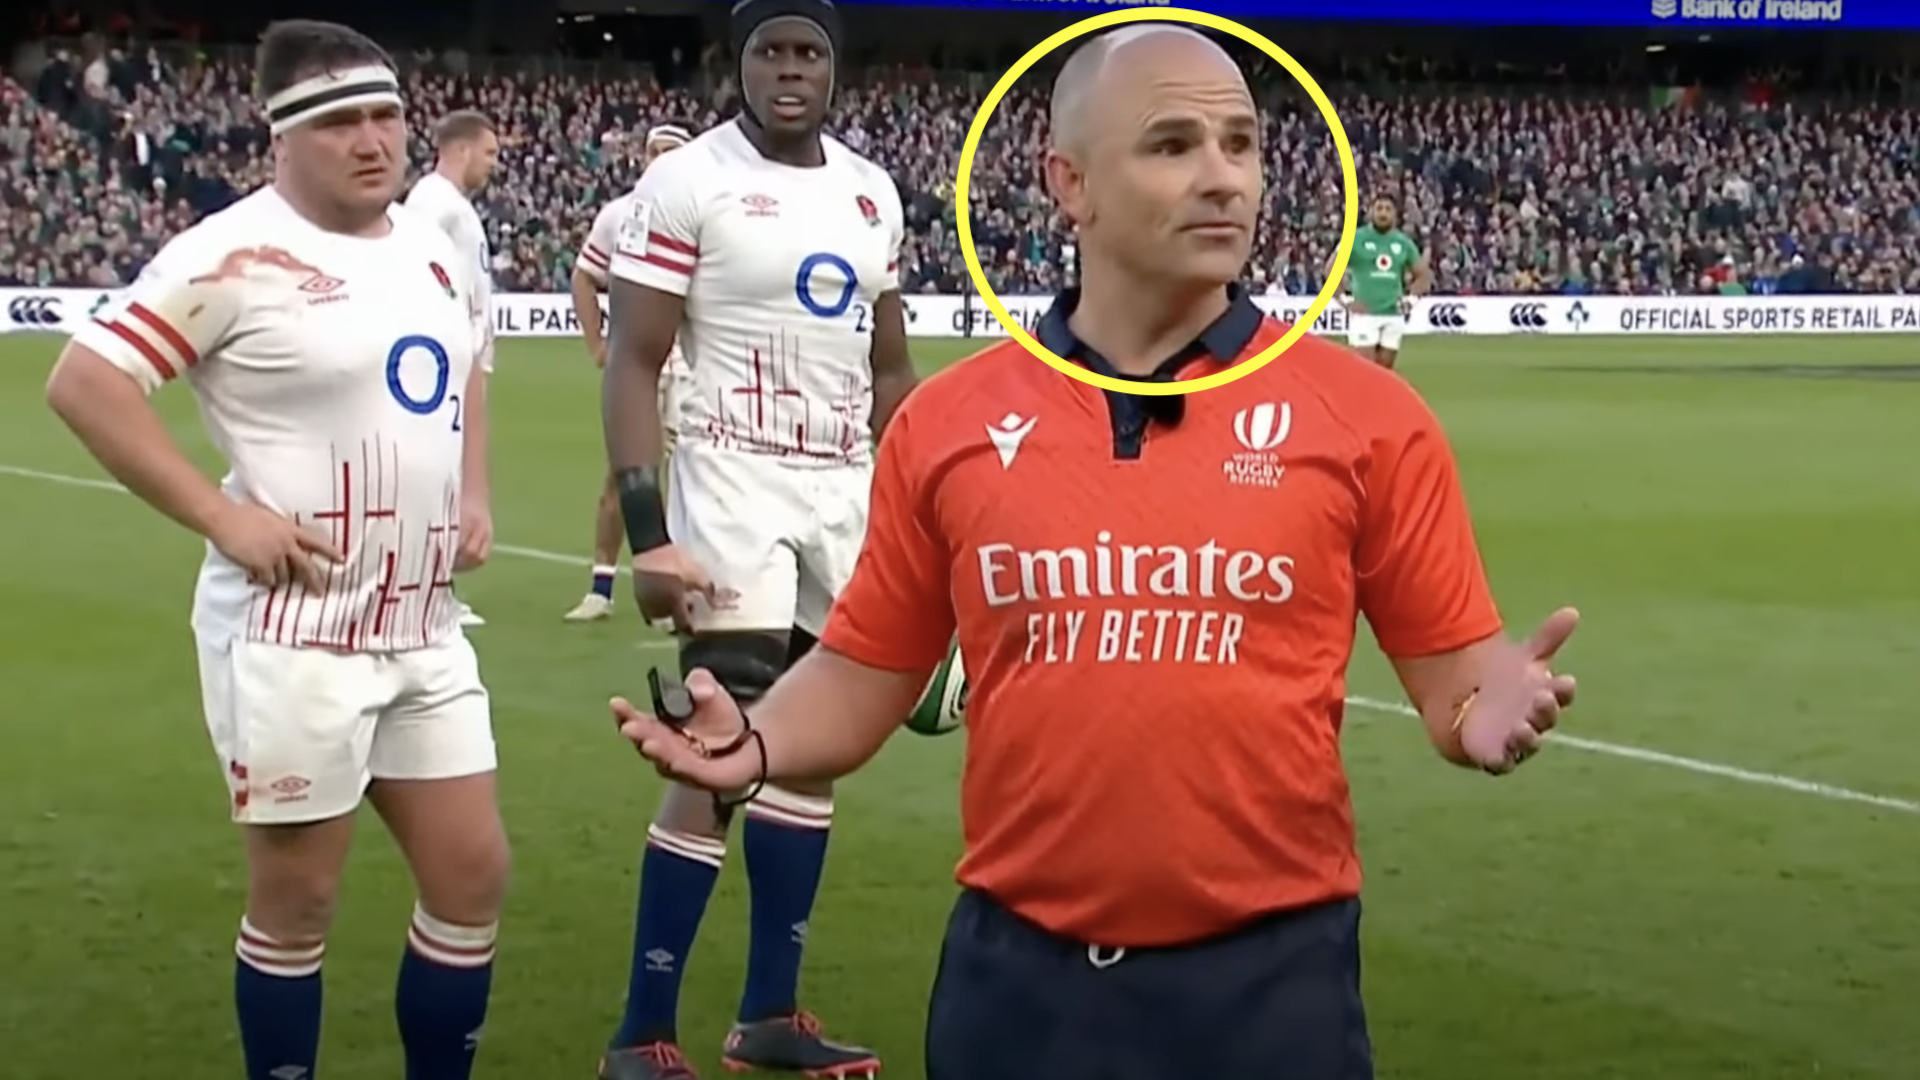 Jaco Peyper named 'Luckiest Person in Rugby' after World Cup referees announced